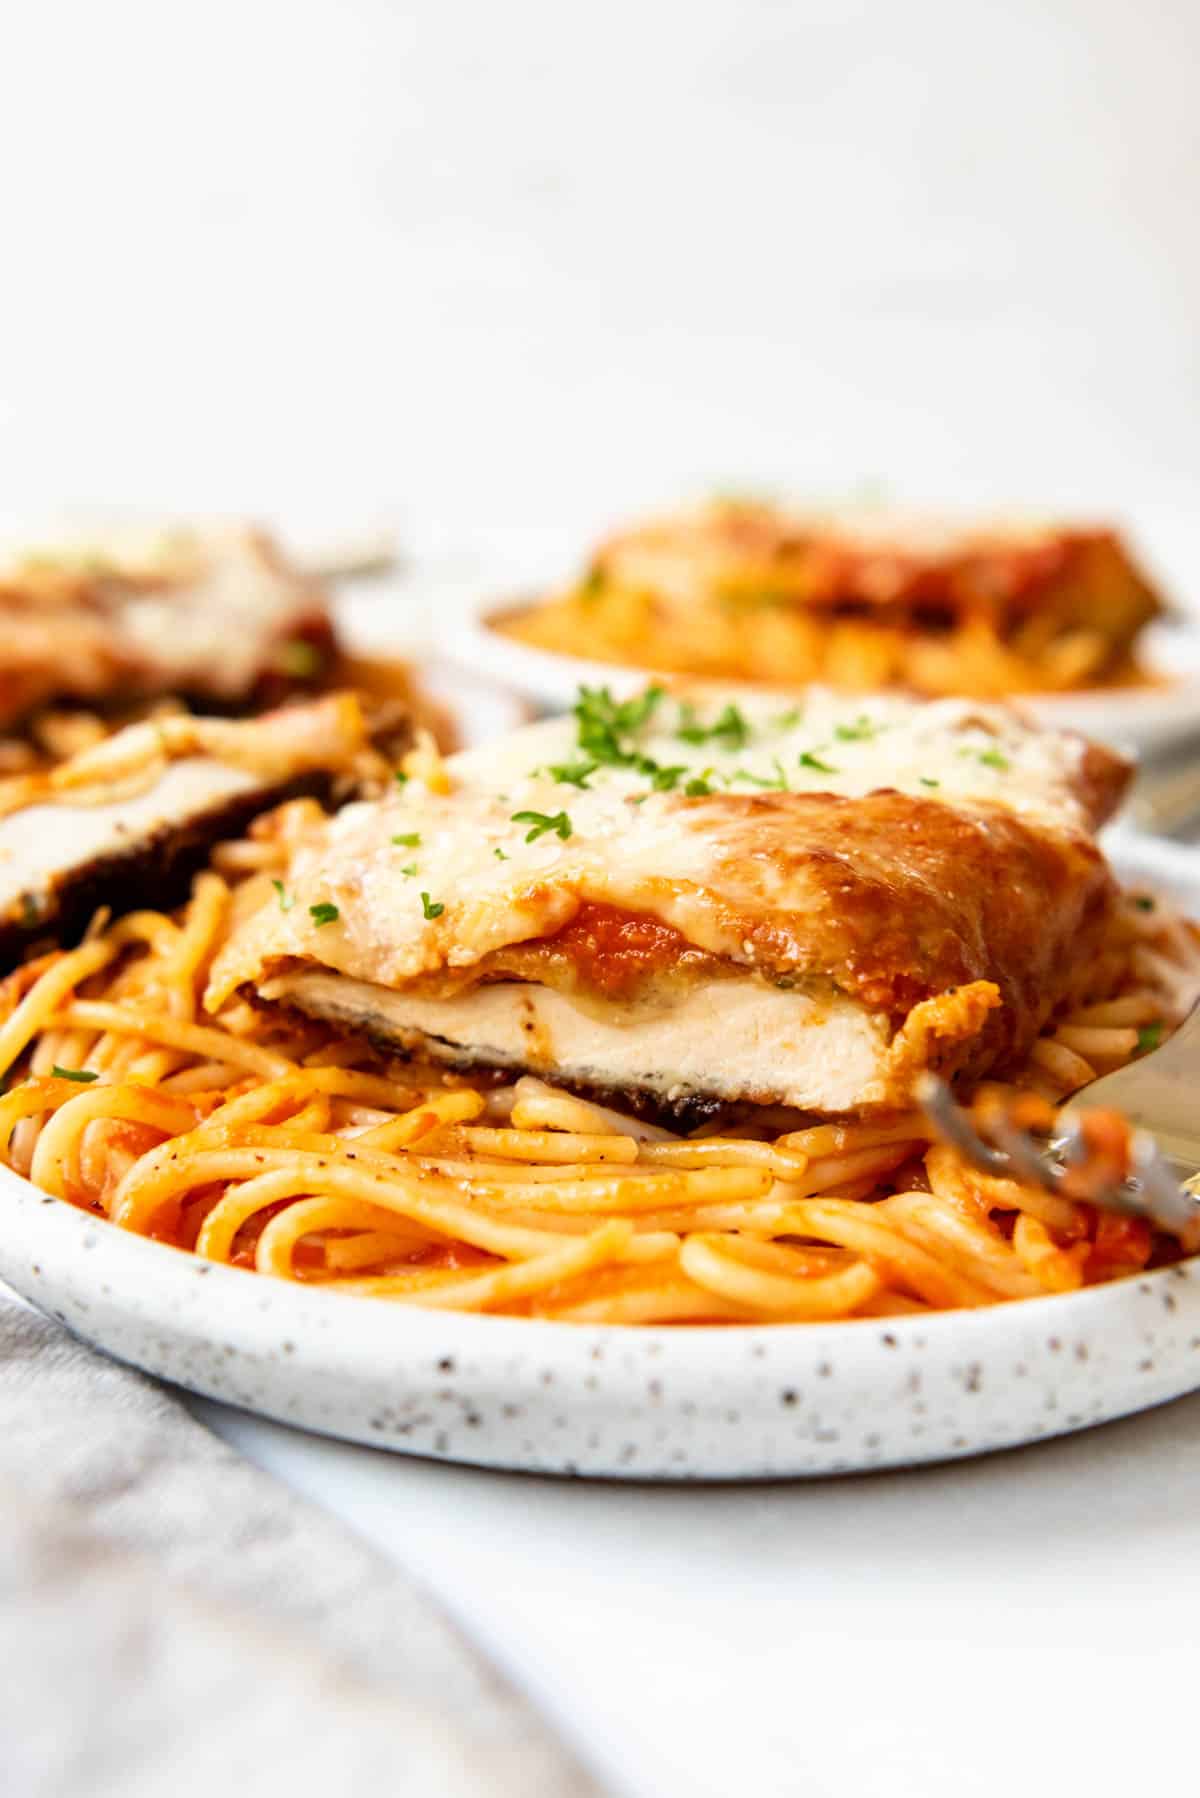 Sliced chicken parmesan on a bed of spaghetti tossed in tomato saucer.